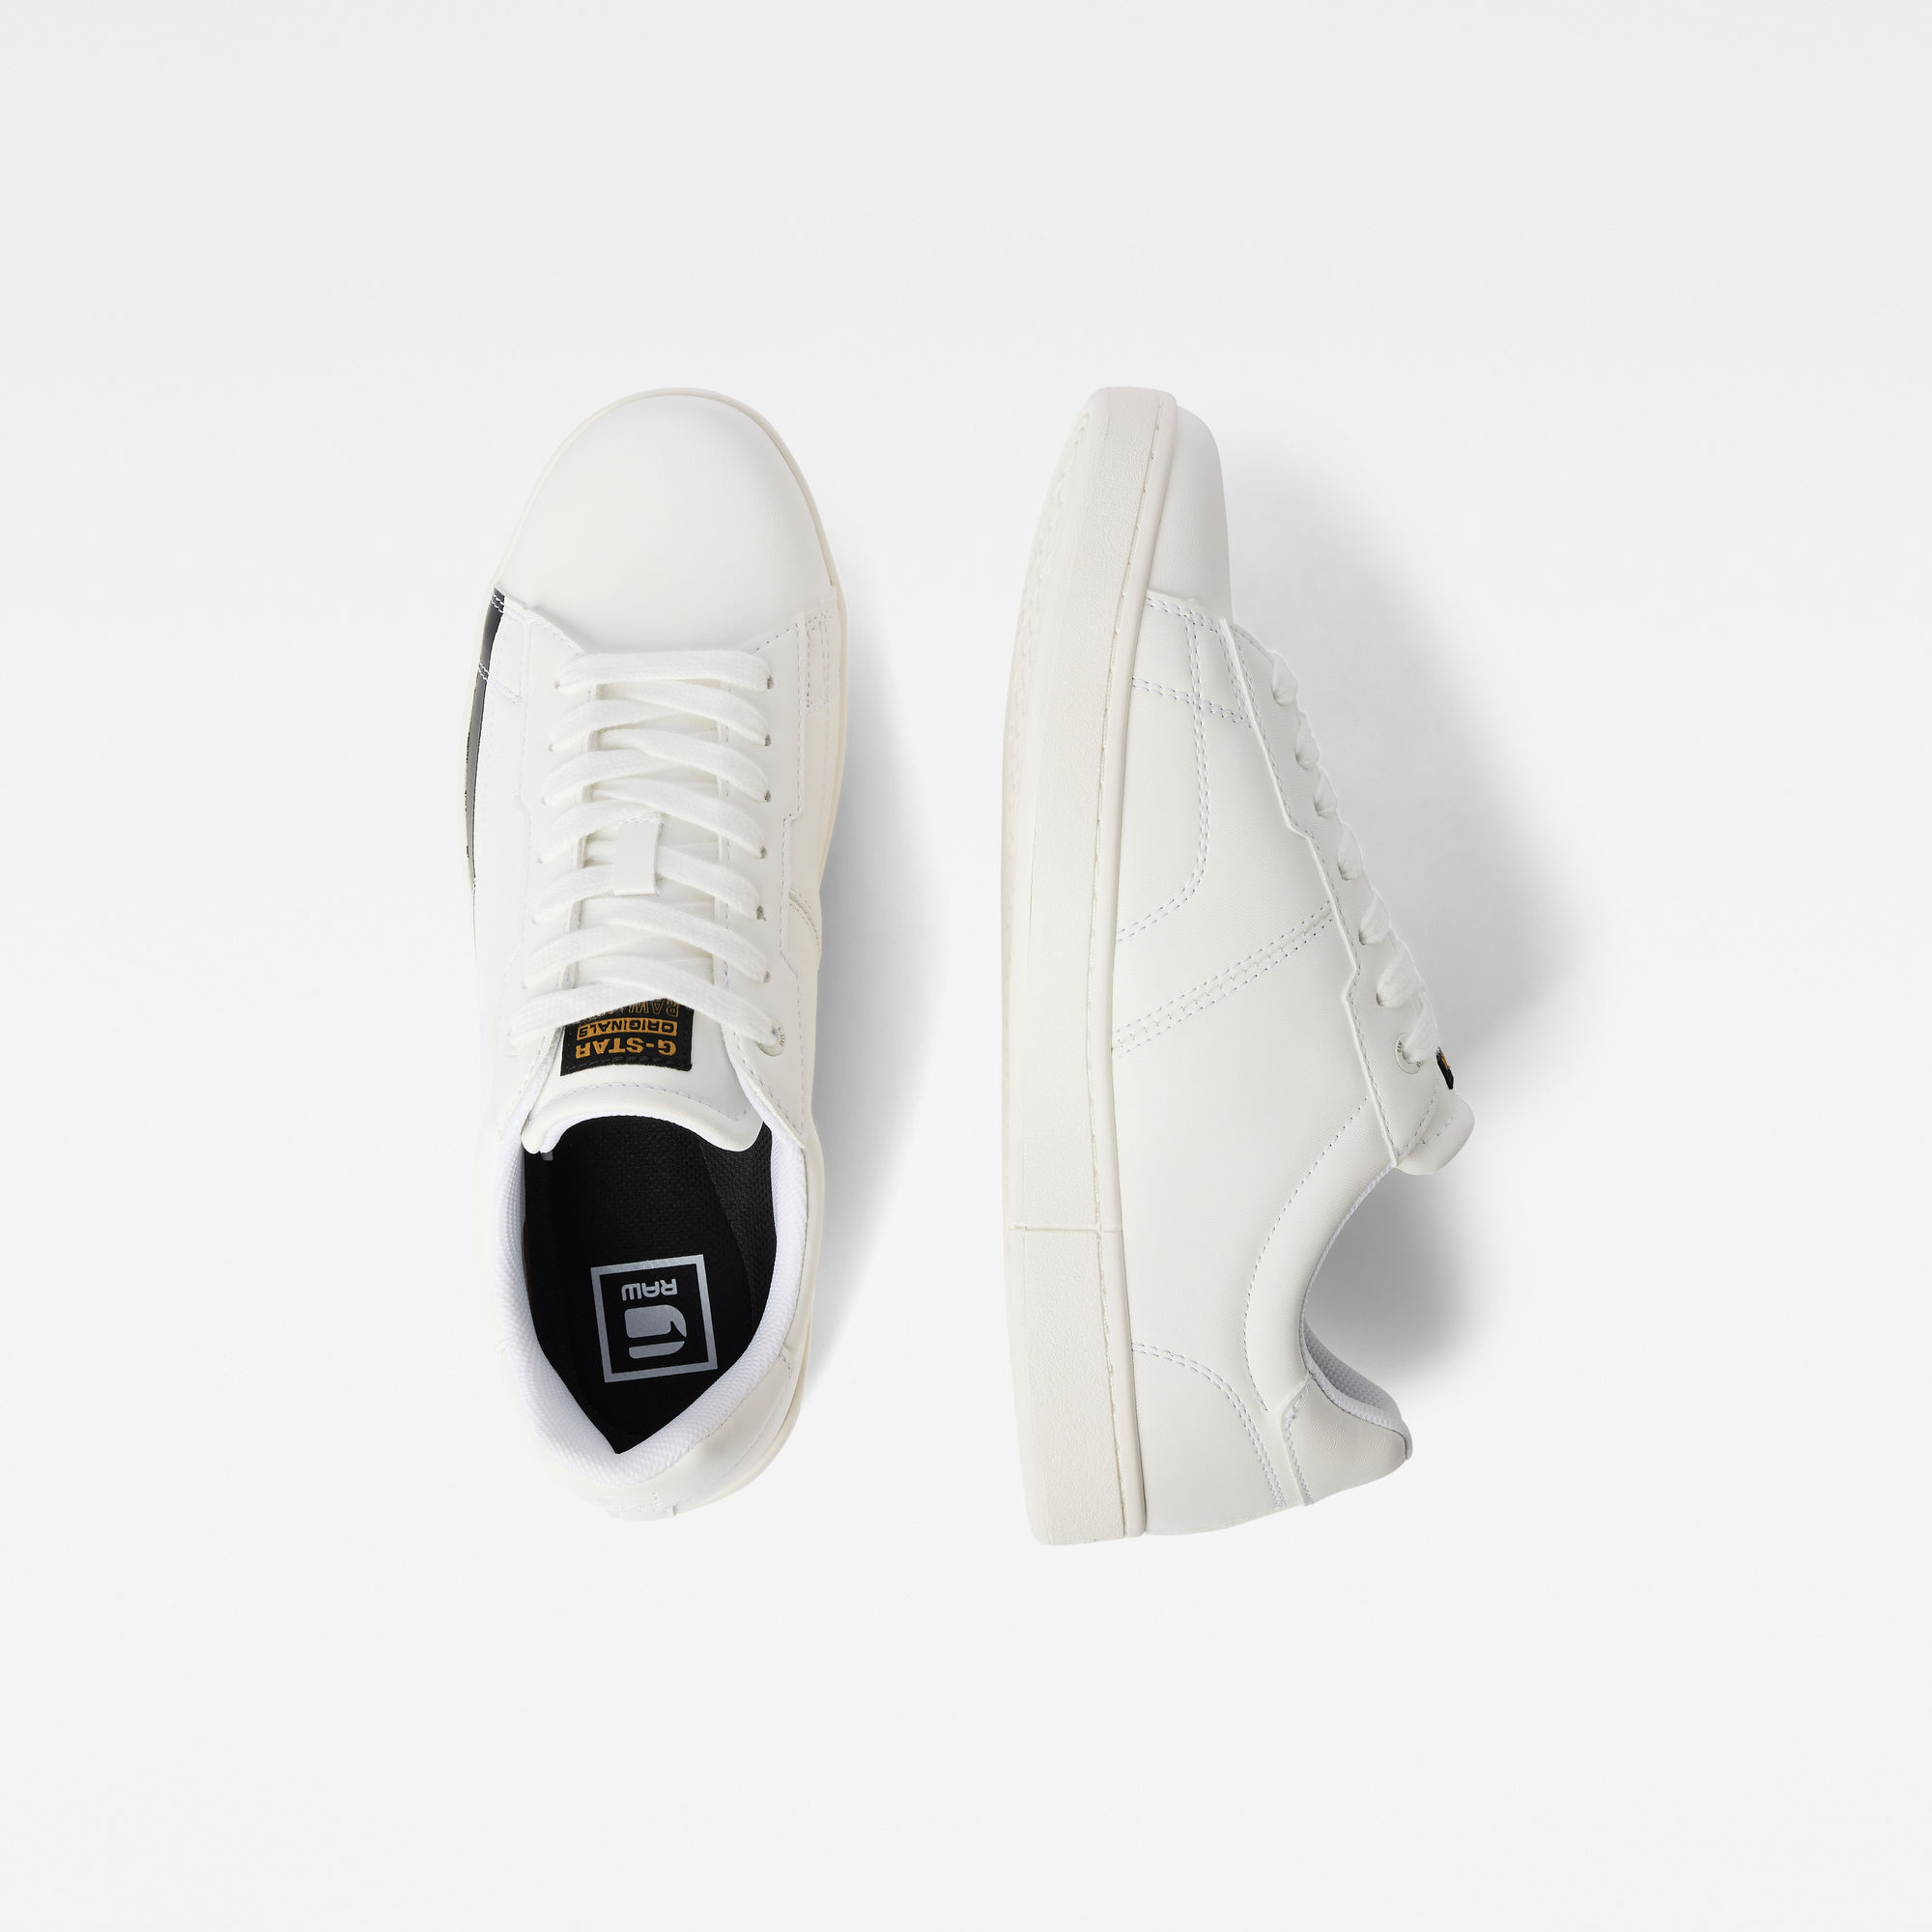 Cadet Logo Sneakers | Multi color | G-Star RAW®